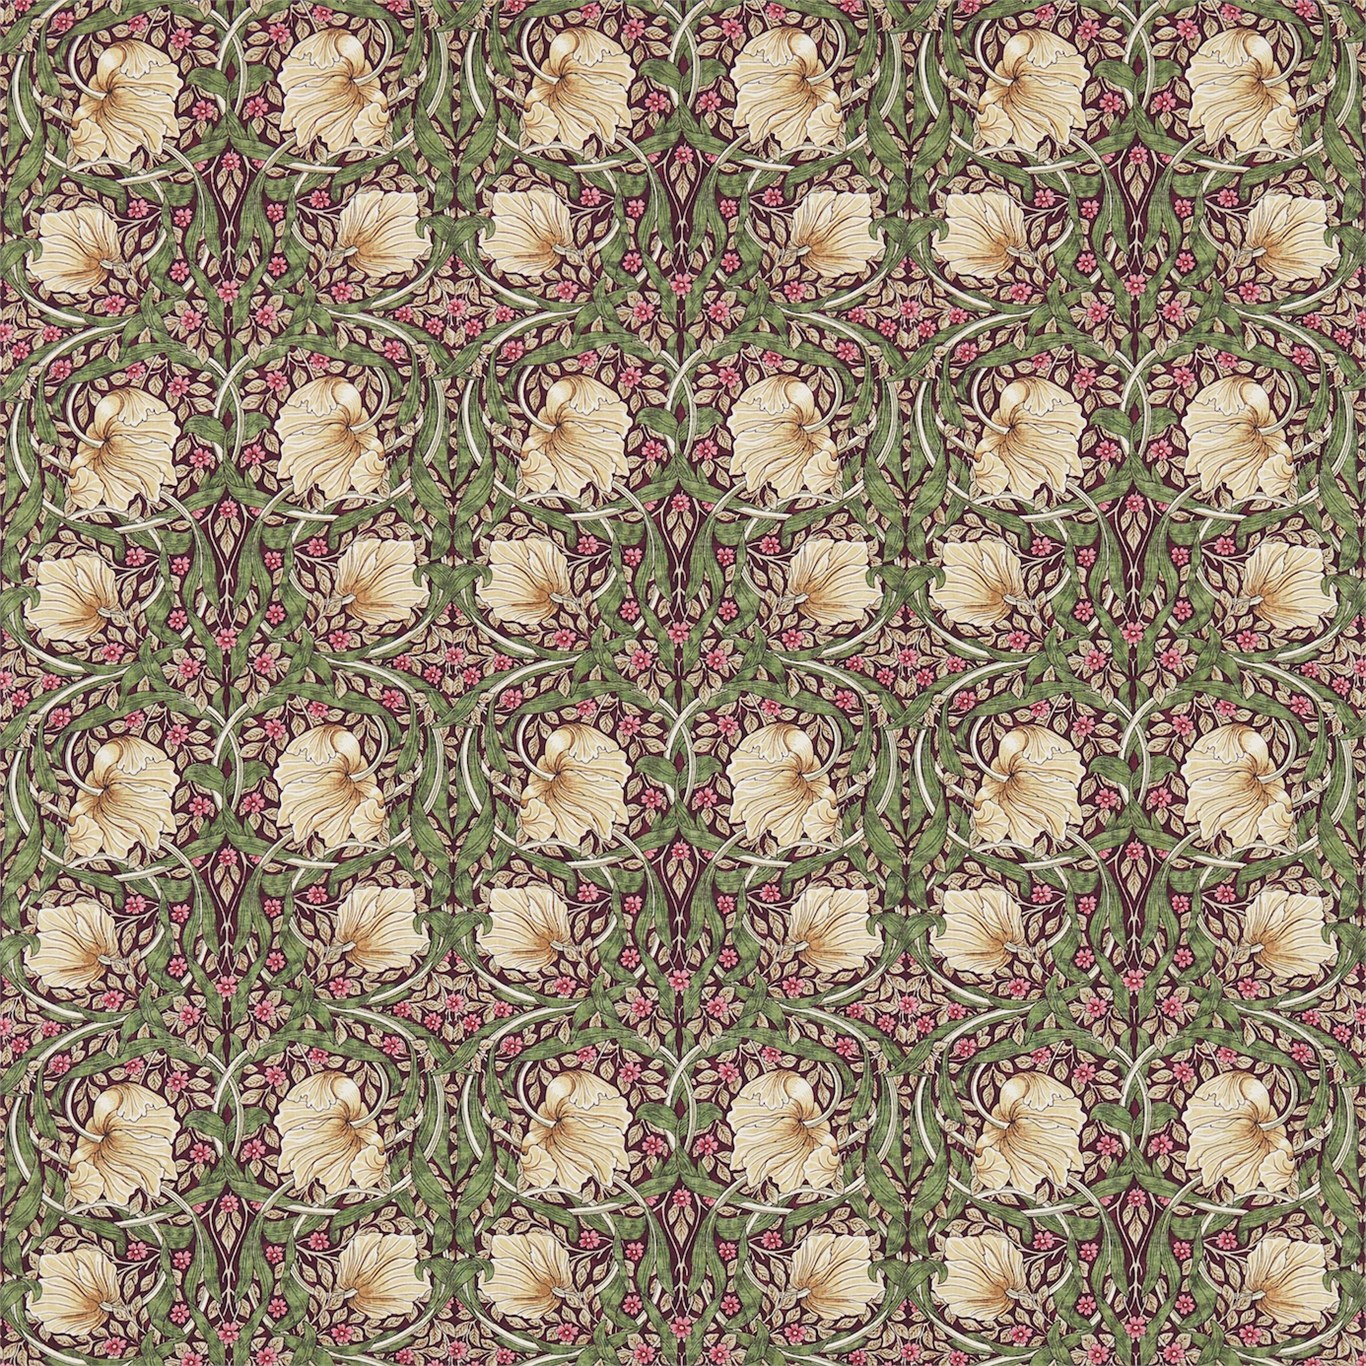 william morris fabric pimpernel heavy cotton £15.99 a mtr max length 2 mtrs 